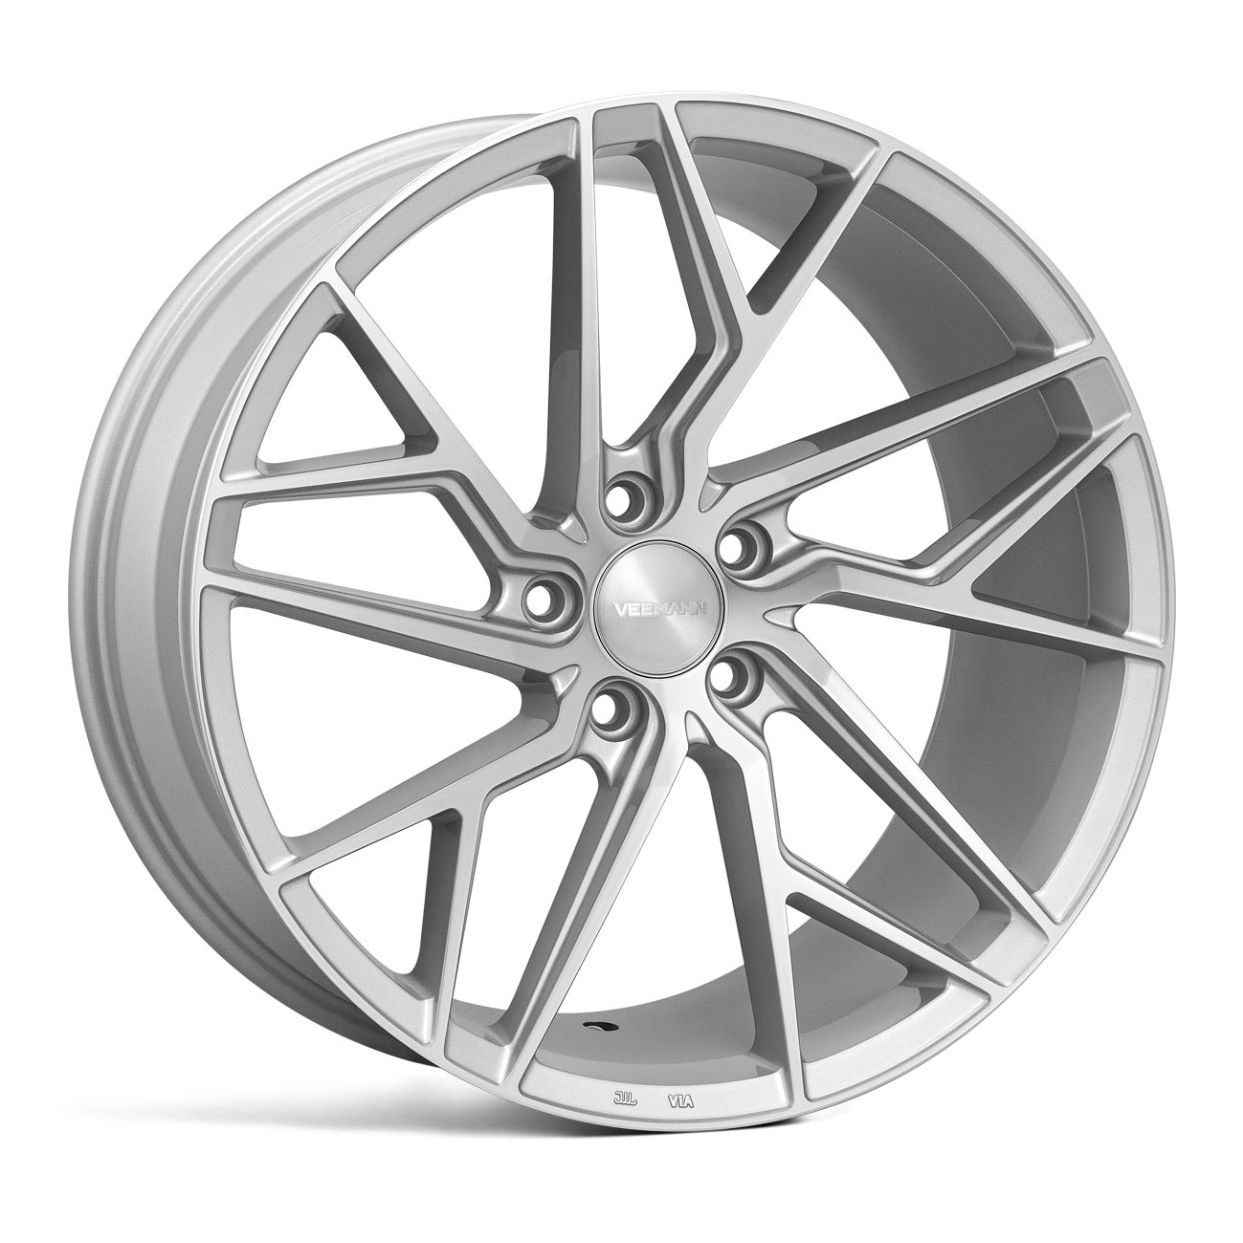 NEW 18" VEEMANN V-FS44 ALLOY WHEELS IN SILVER POL WITH WIDER 9" REARS